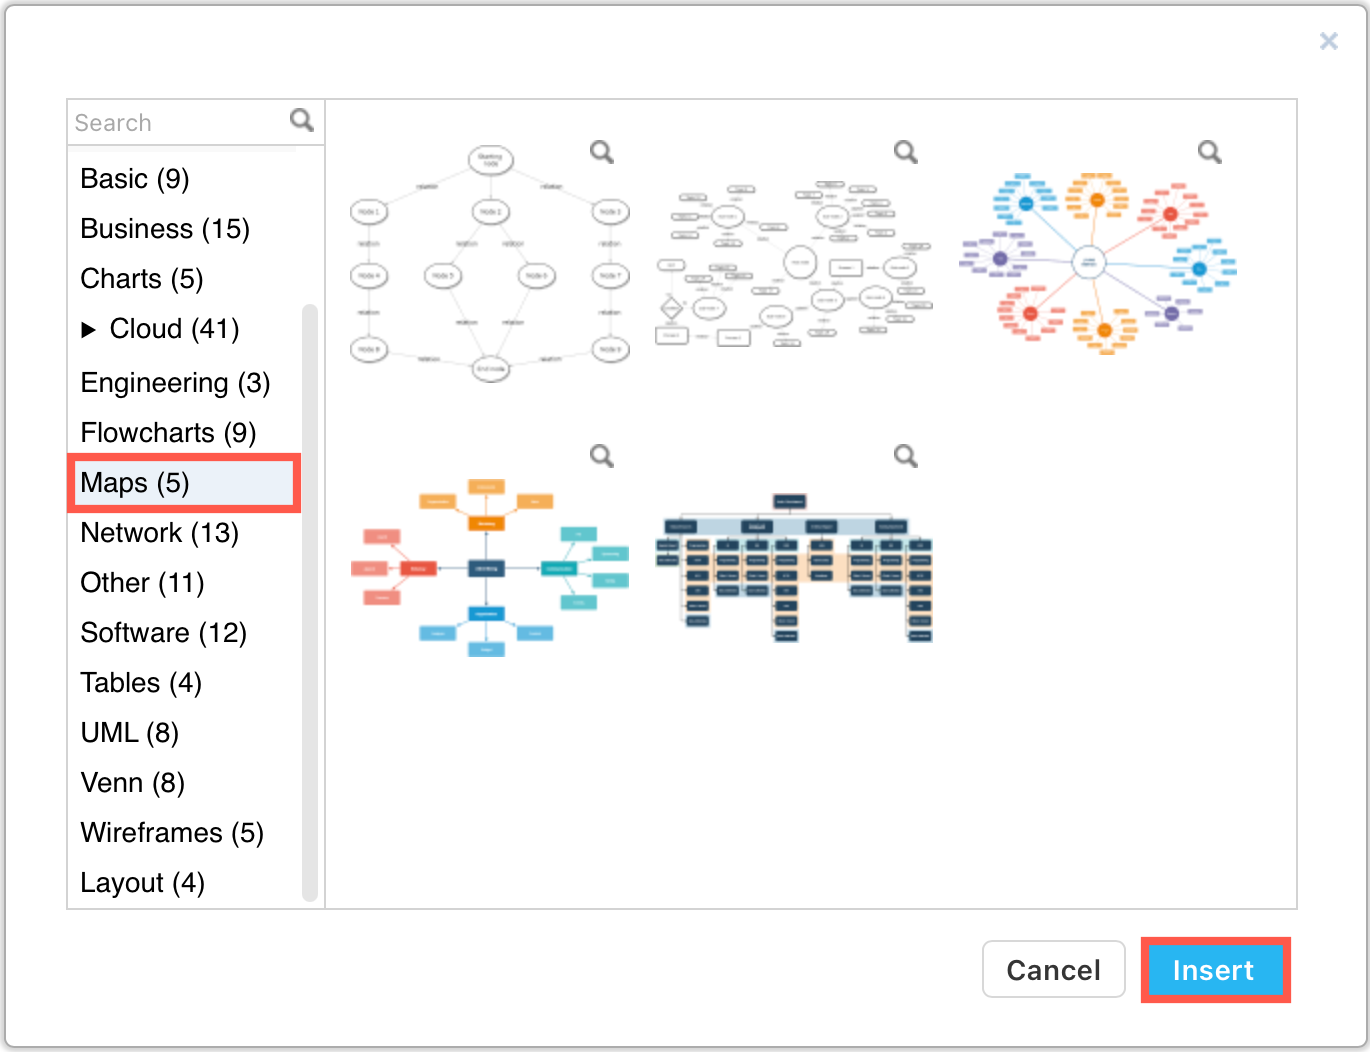 Use the draw.io map templates to create a mindmap in an online whiteboard in Confluence